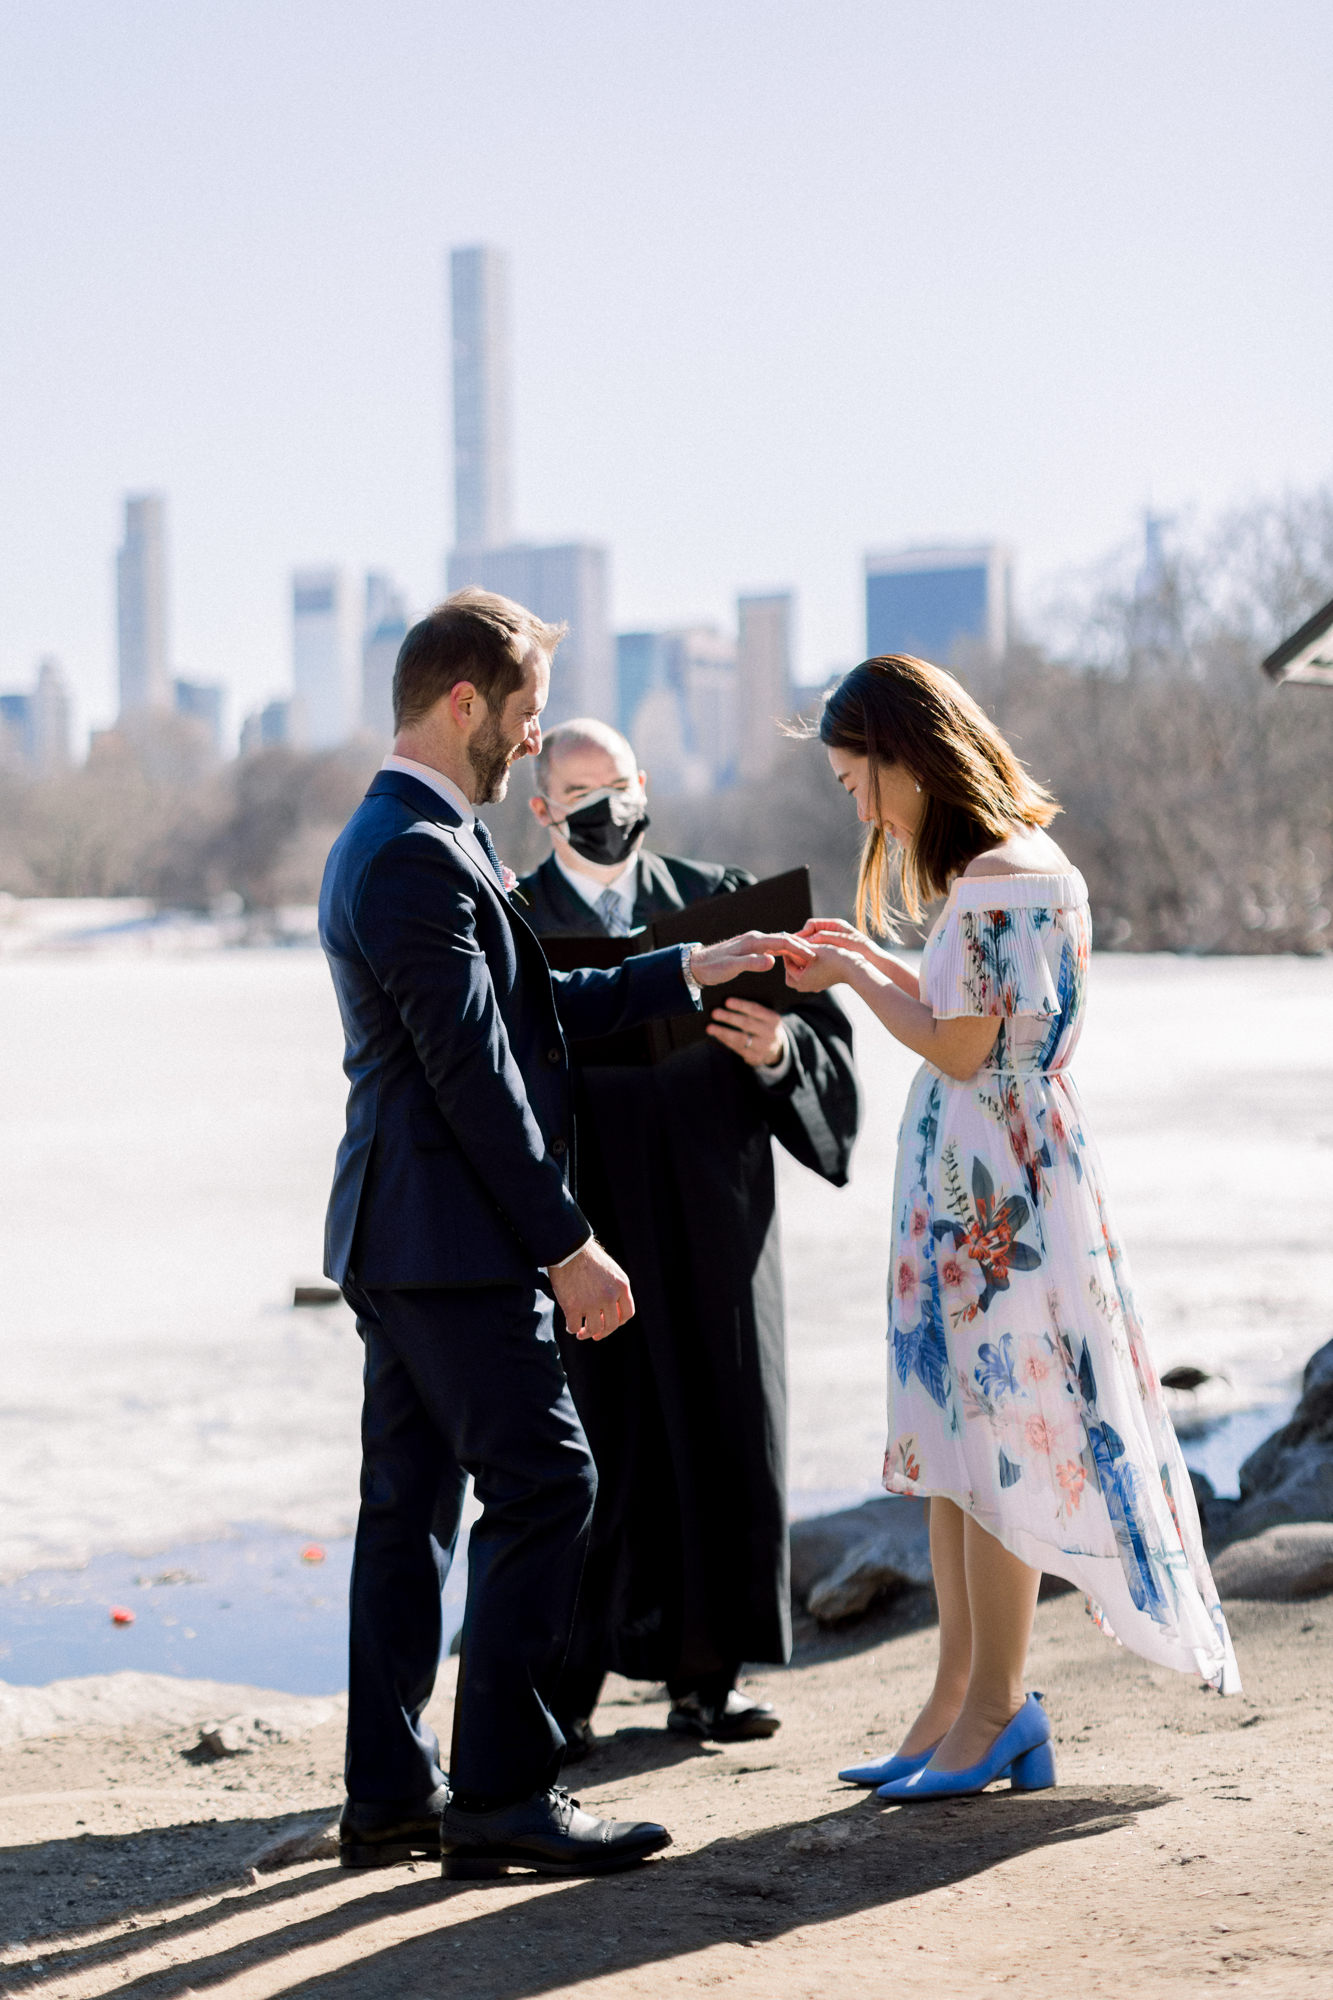 Tender Central Park Wedding Photos in Wintery NYC